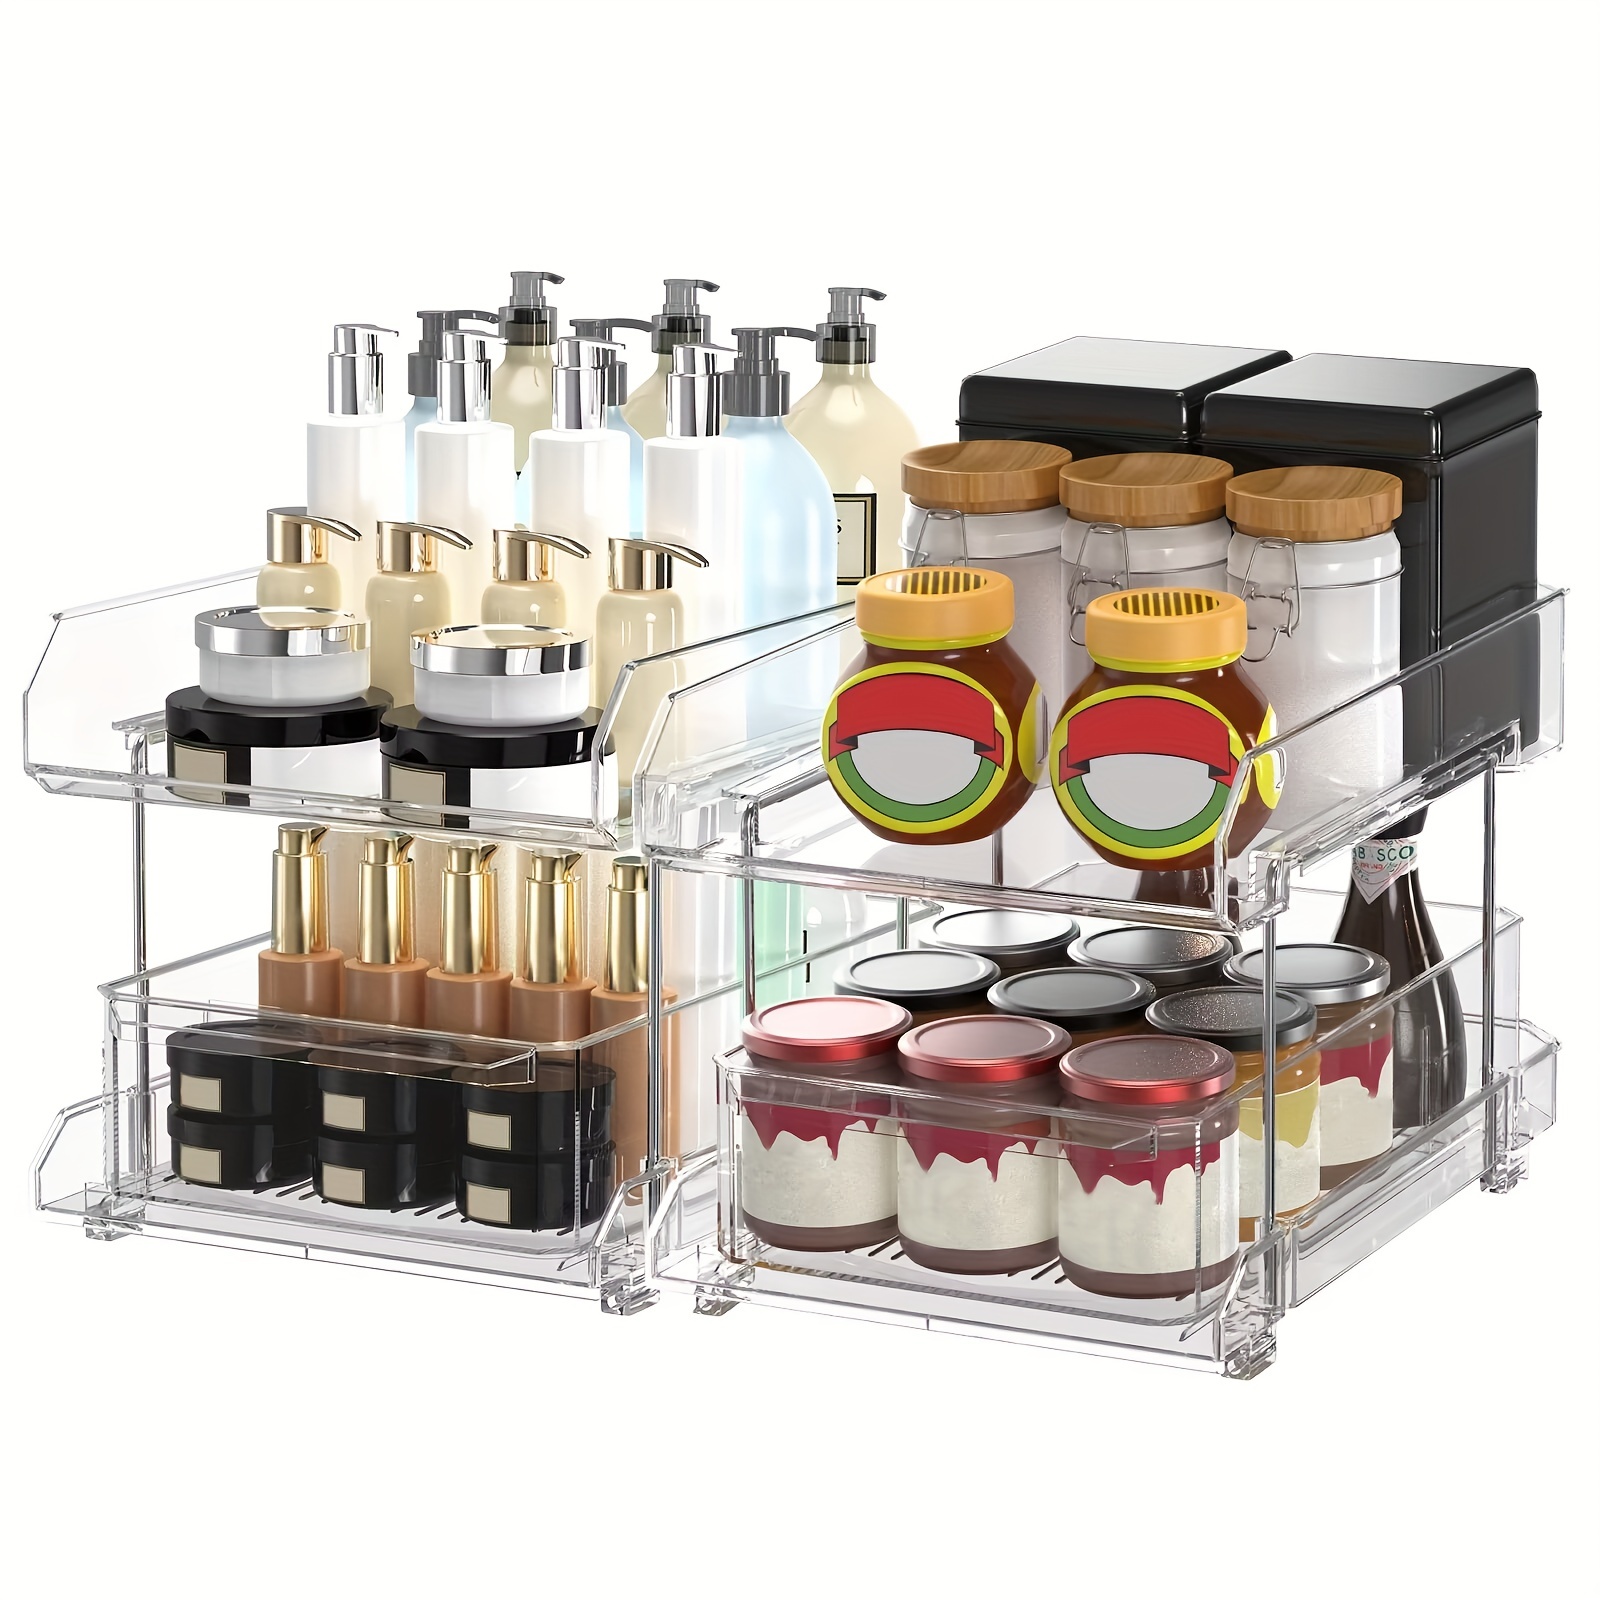 1pc, 2 Tier Clear Organizer With Dividers For Cabinet / Counter, Multi-Use  Slide-Out Storage Container - Kitchen, Pantry, Medicine Cabinet Storage Bin